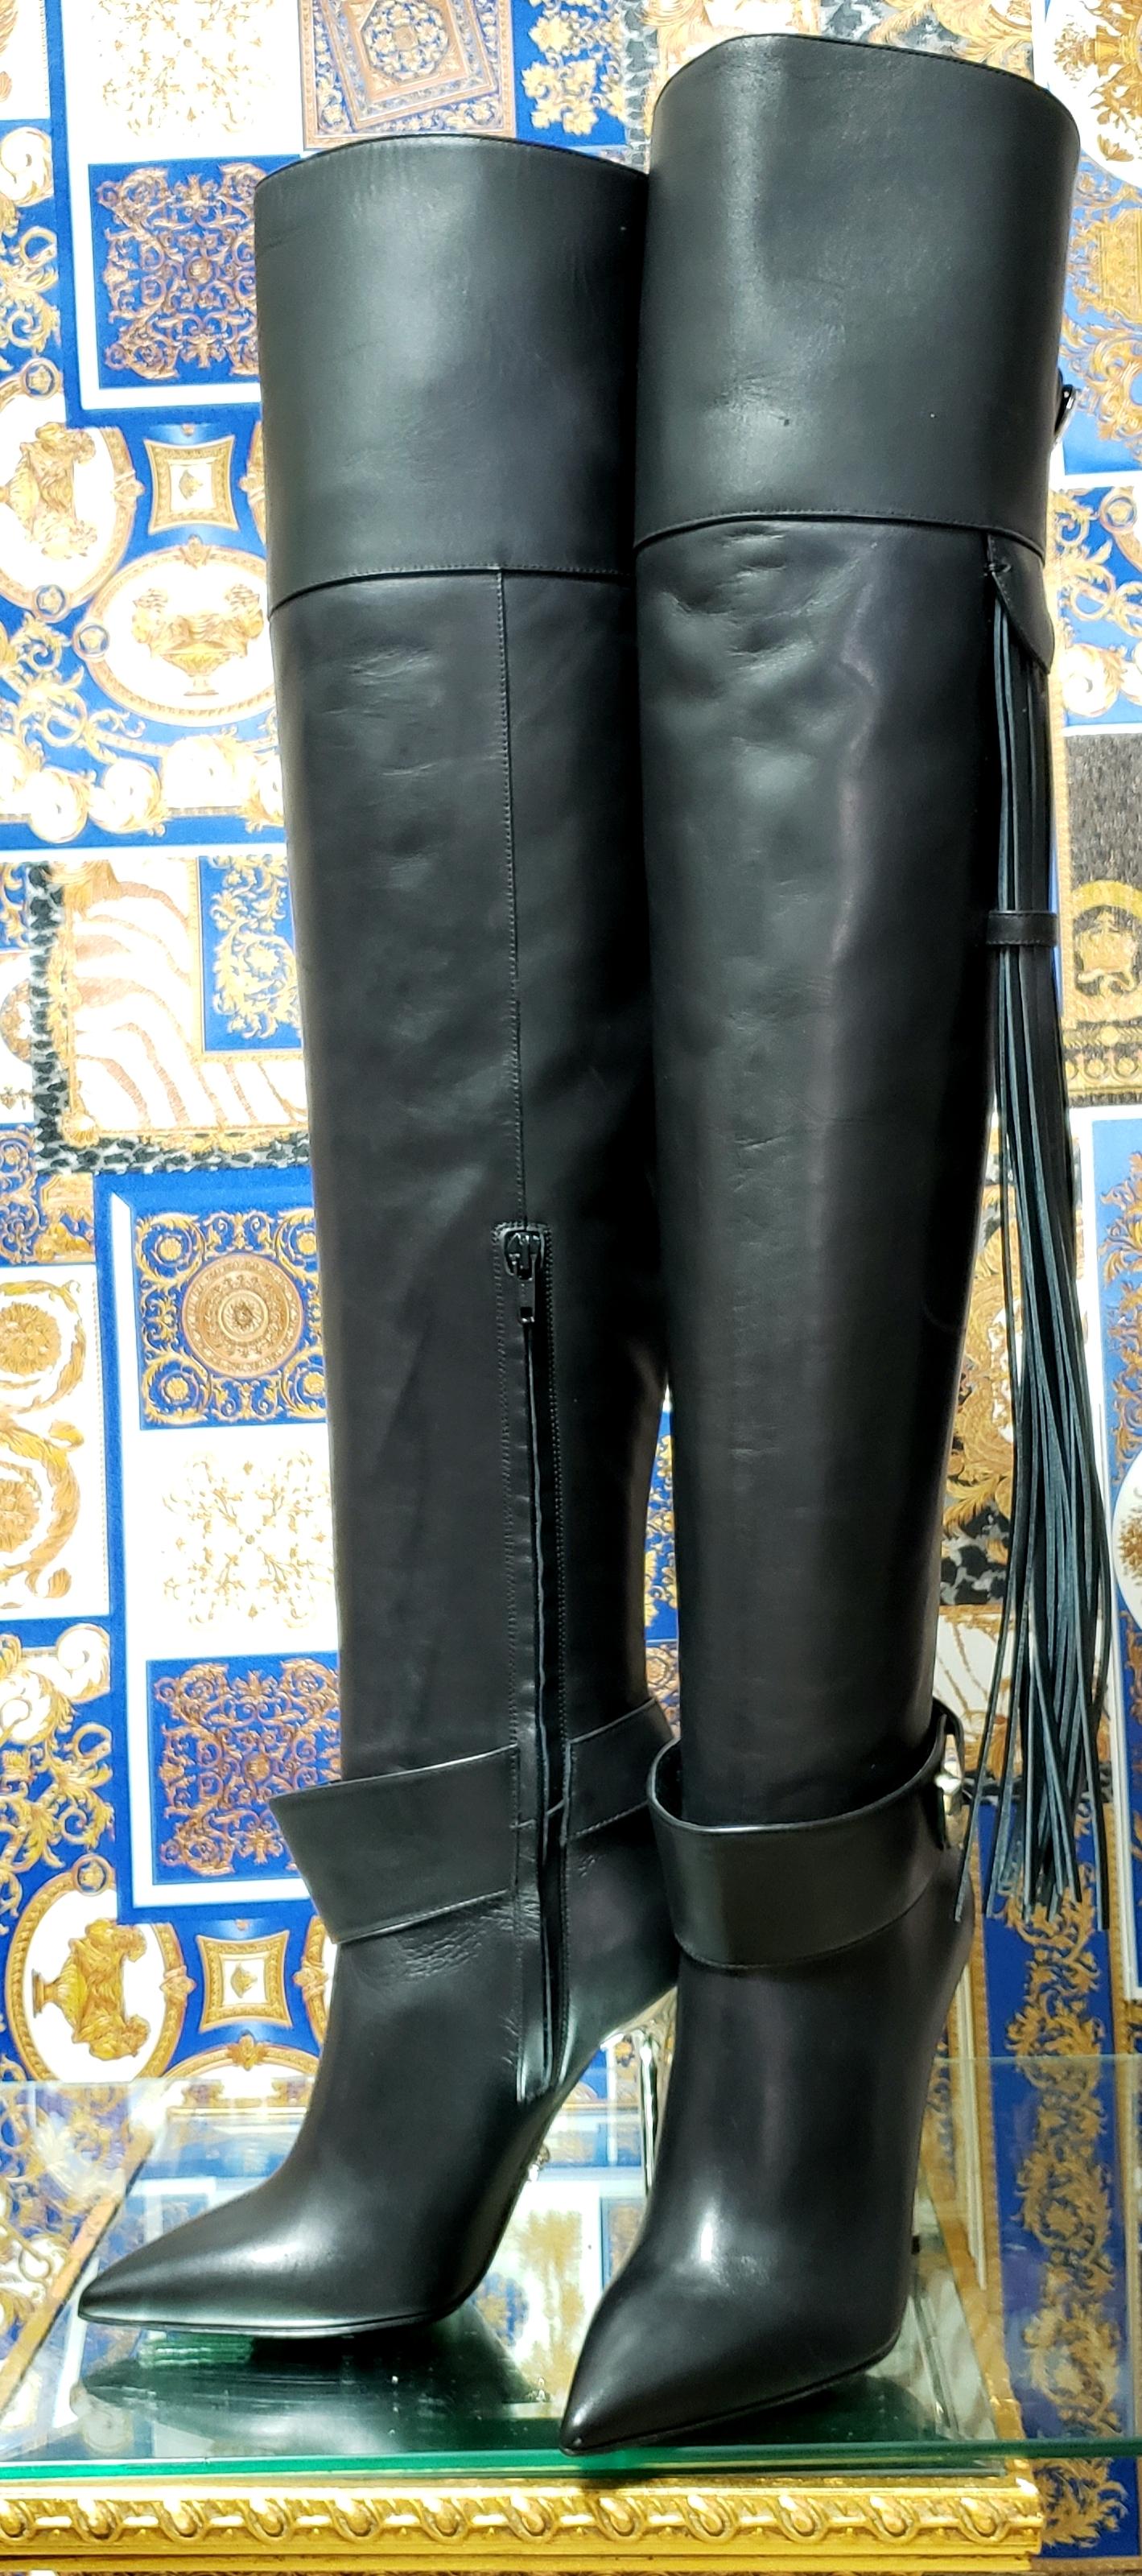 Black Pre-Fall/14 L#9 VERSACE BLACK LEATHER OVET-the-KNEE Boots with TASSELS 35, 36, 39